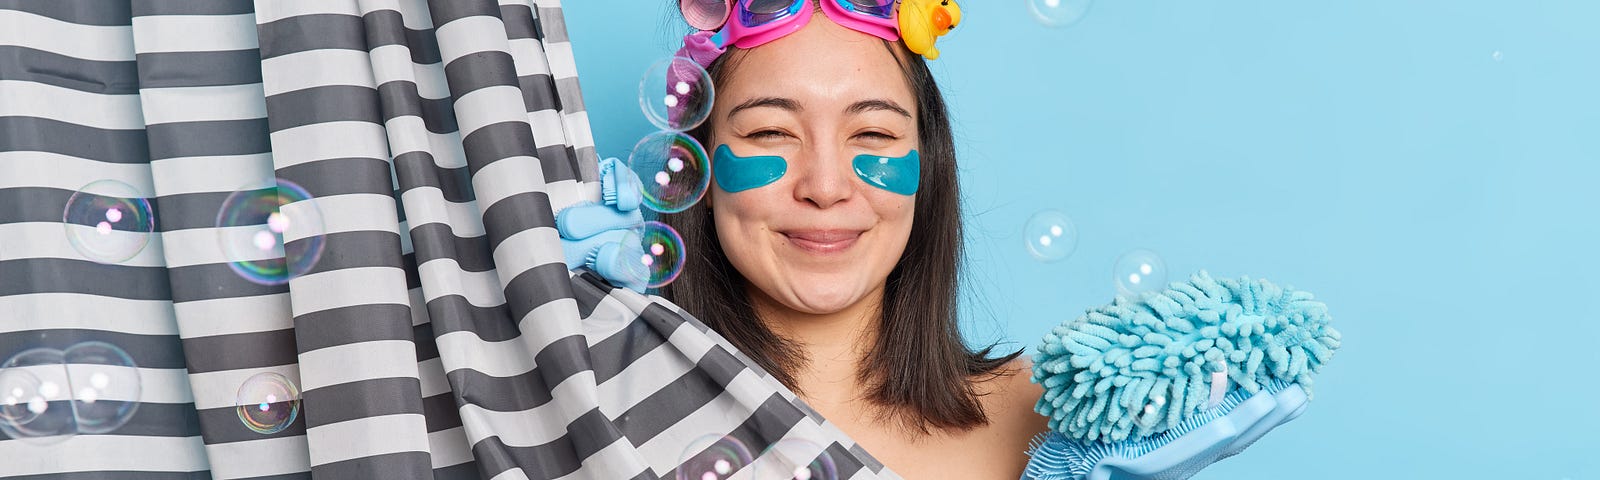 Woman wearing goggles and blue dish gloves with hair in curlers and teal colored face mask under eyes stands in shower with black and white curtain surrounded by bubbles looking content with eyes closed